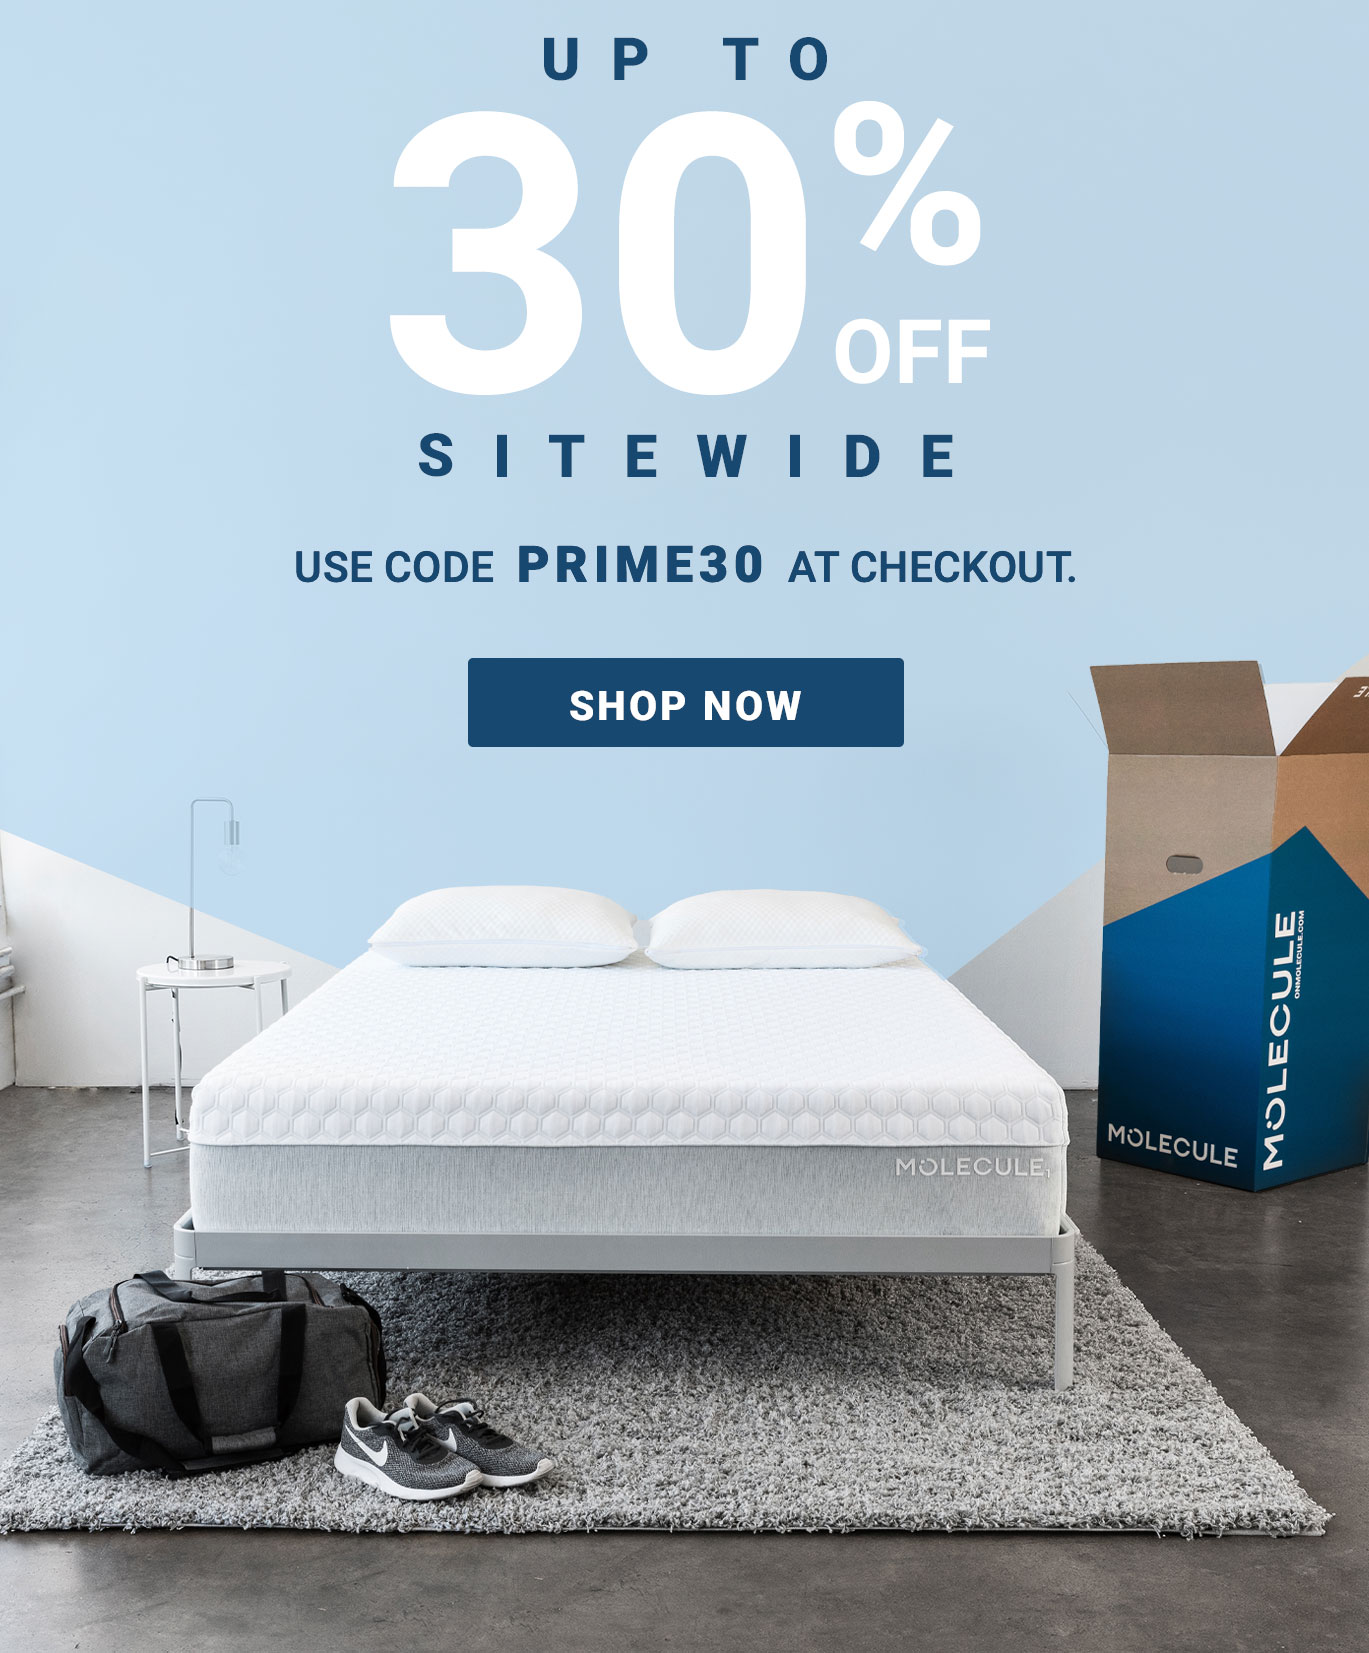 Up to 30% off sitewide. Use code PRIME30 at checkout.